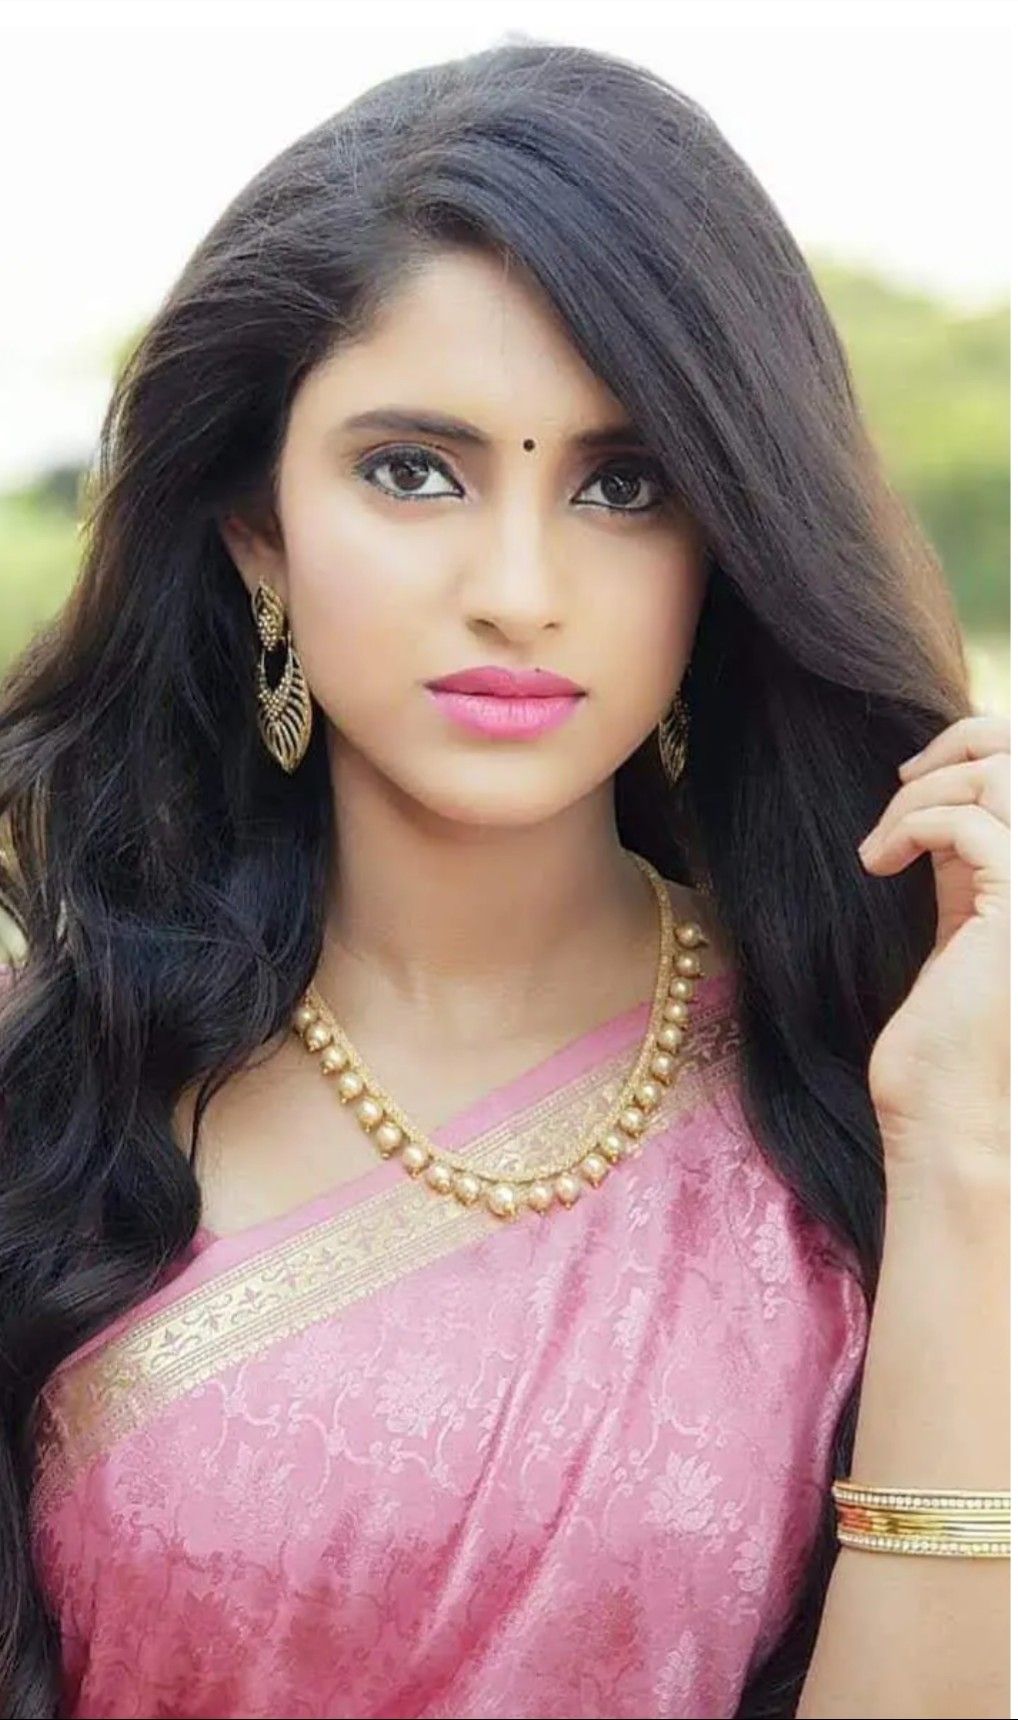 Indian beauty